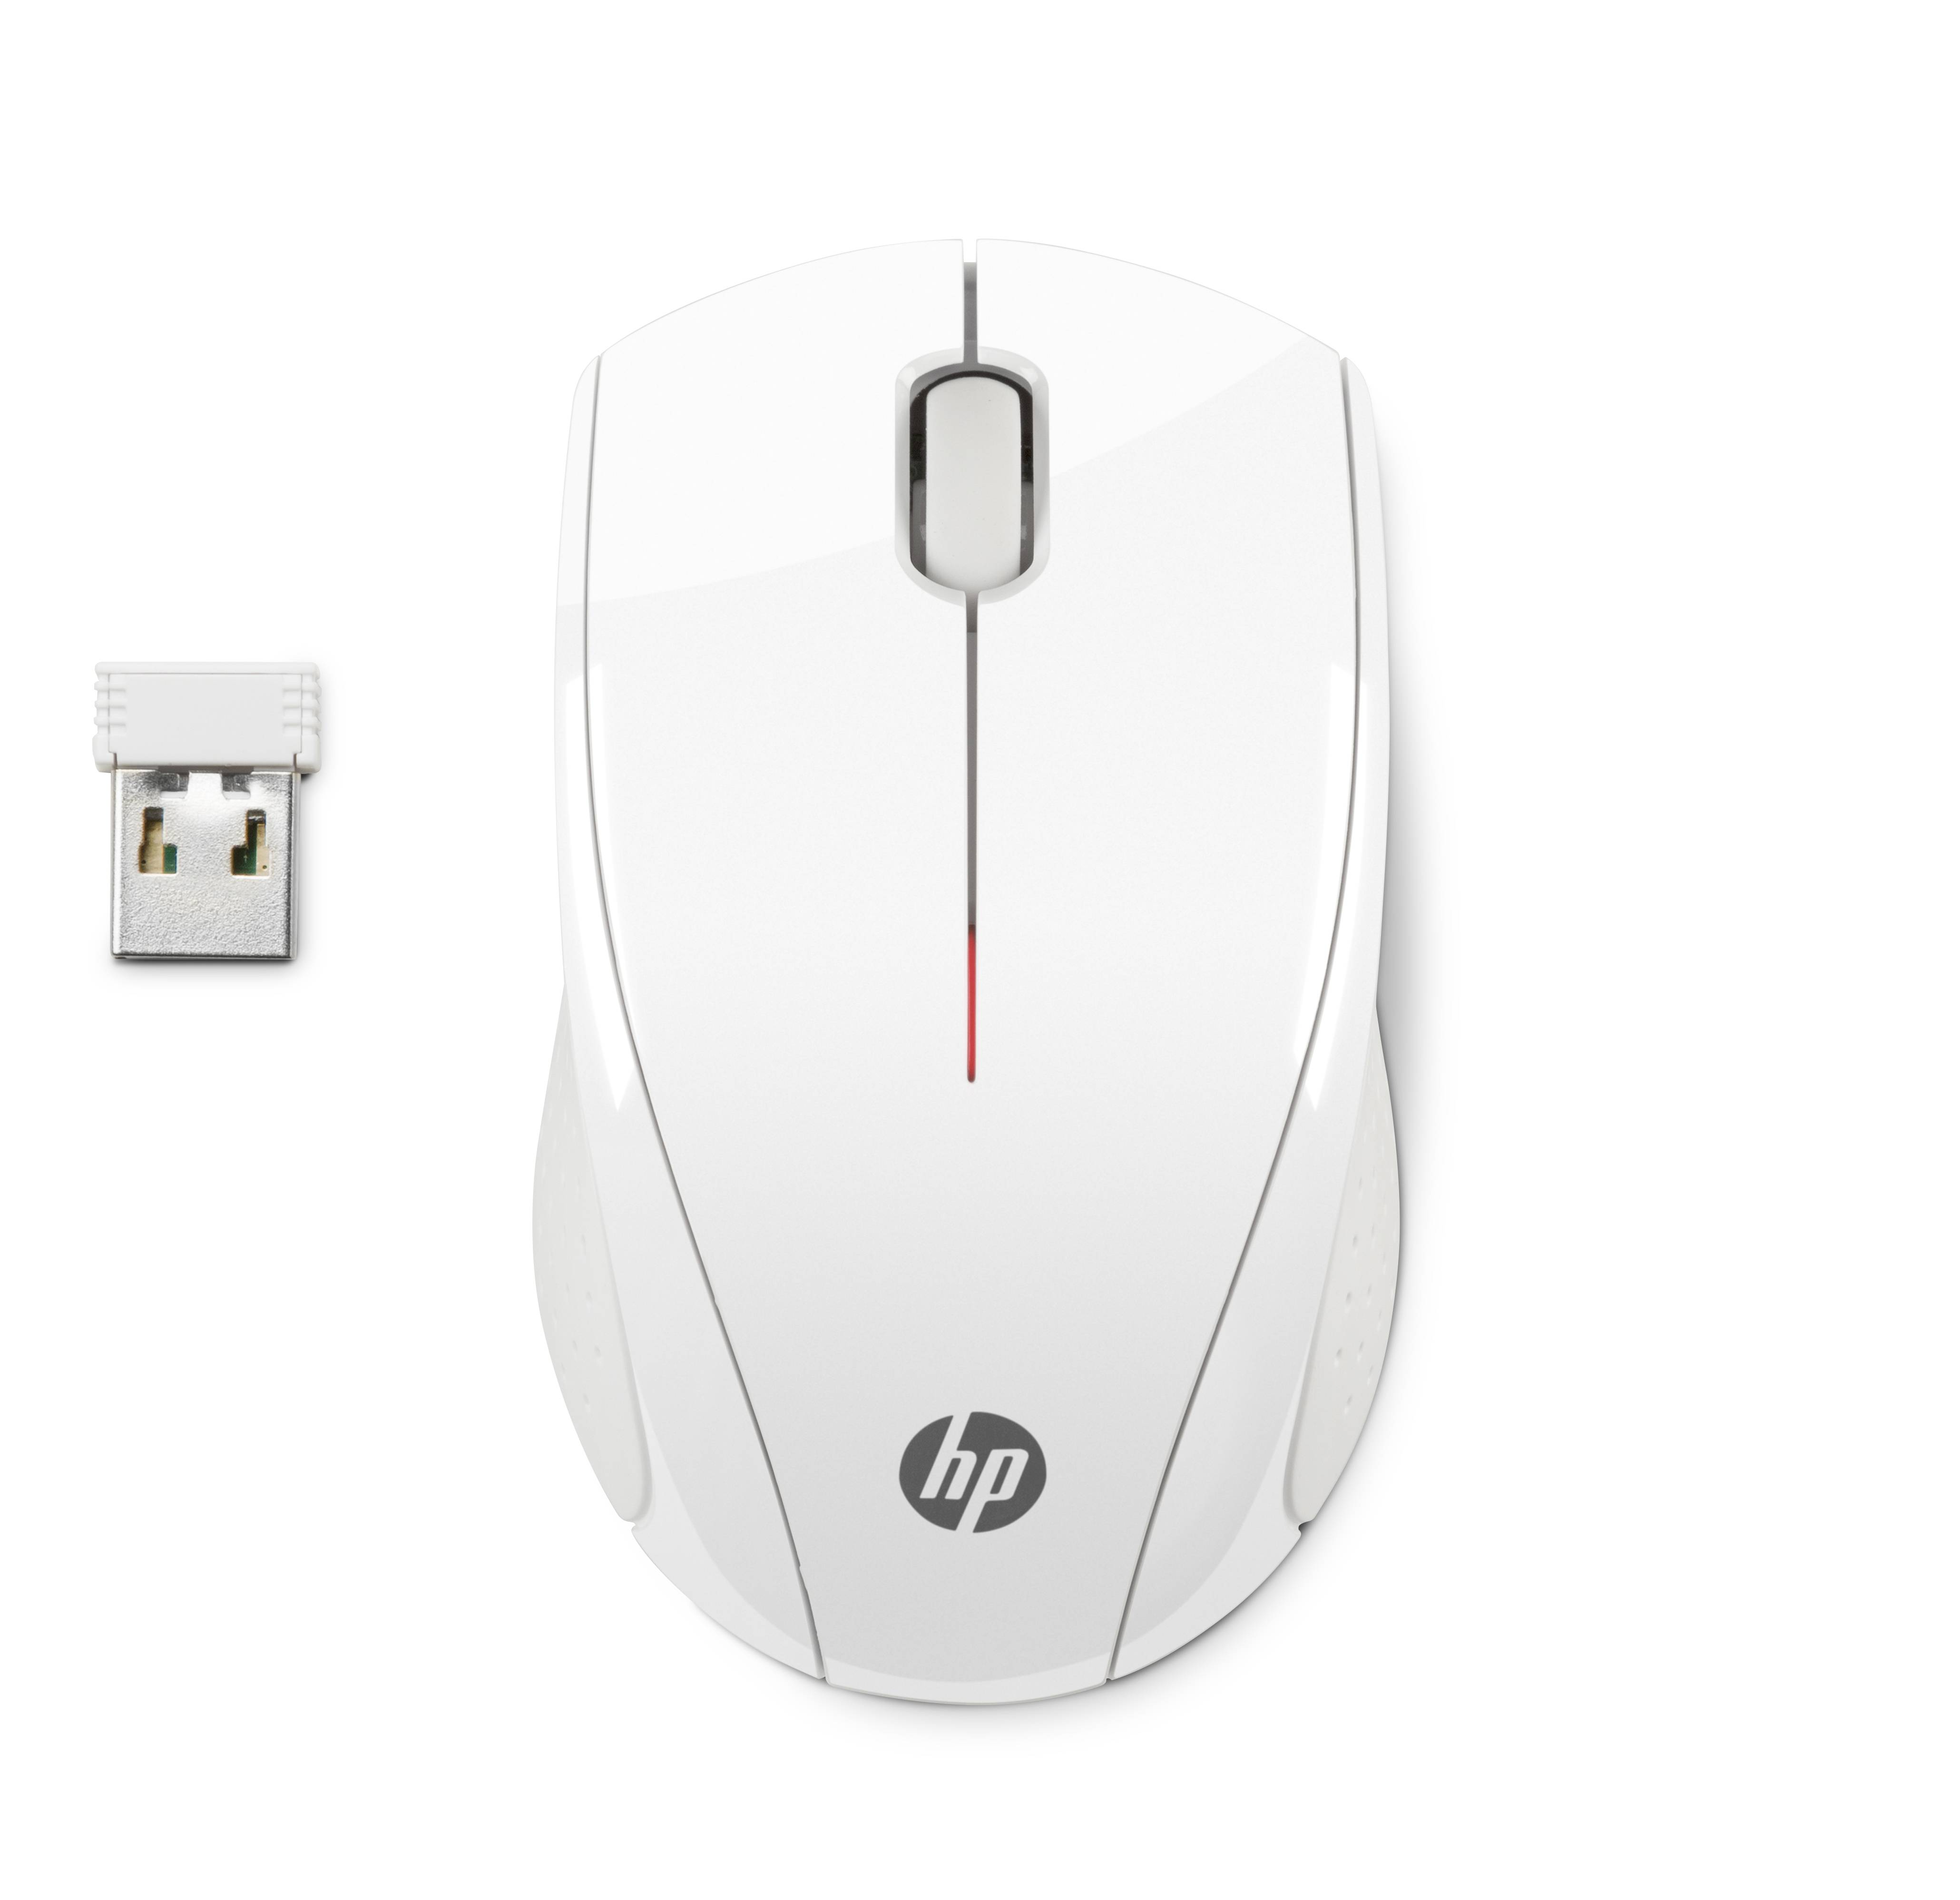 hp wireless mouse x3000 driver windows 7